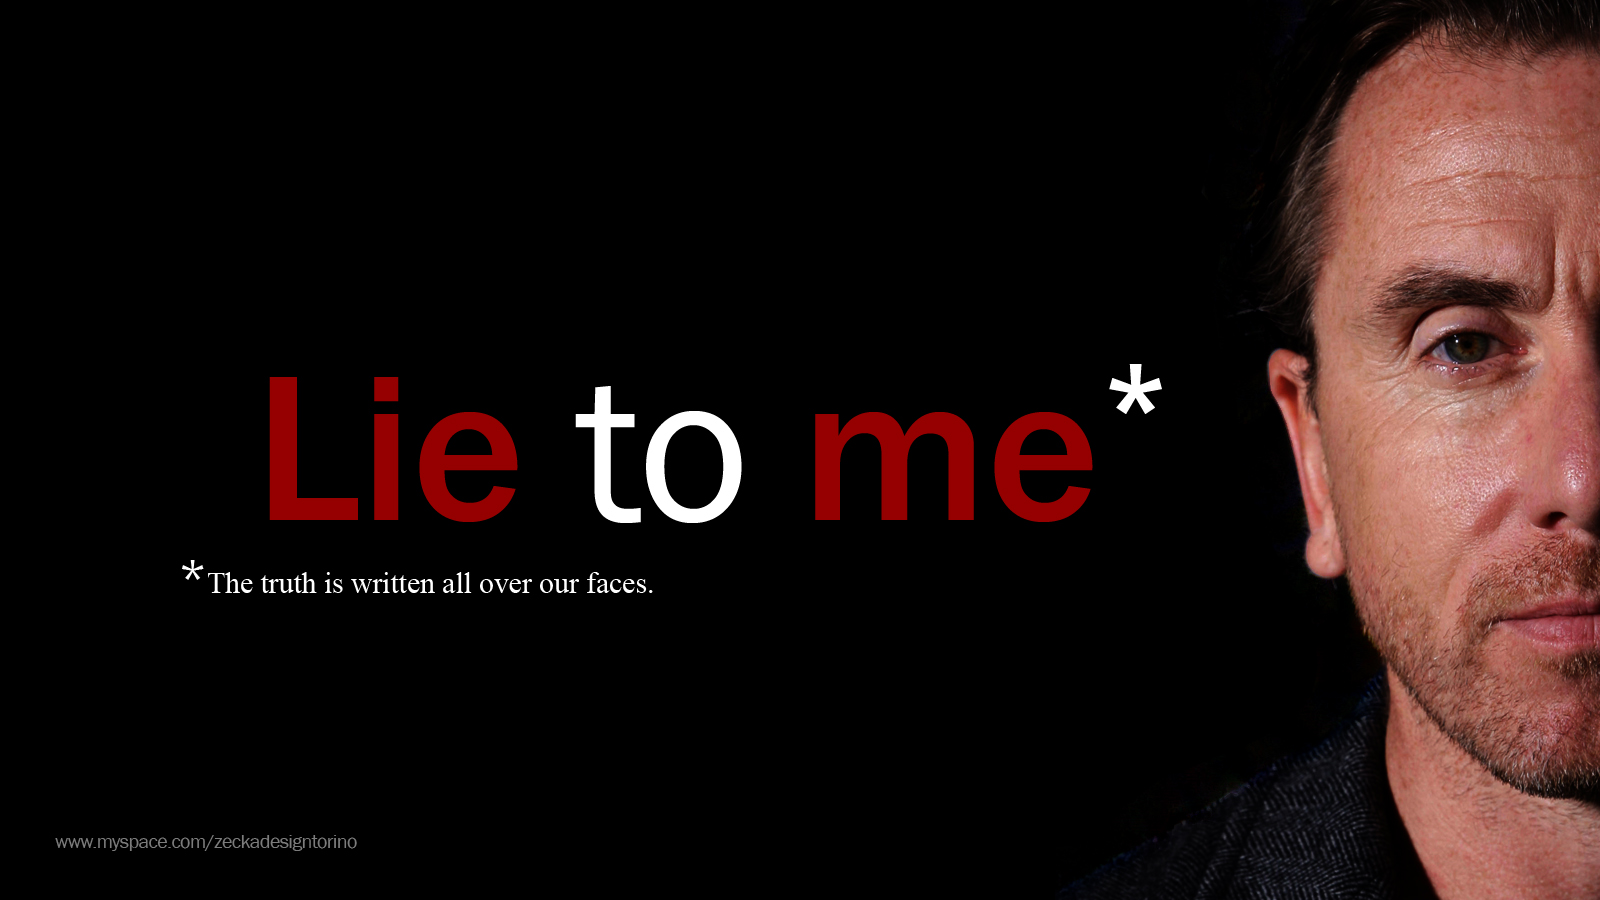 lie to me wallpaper,face,text,chin,nose,head.